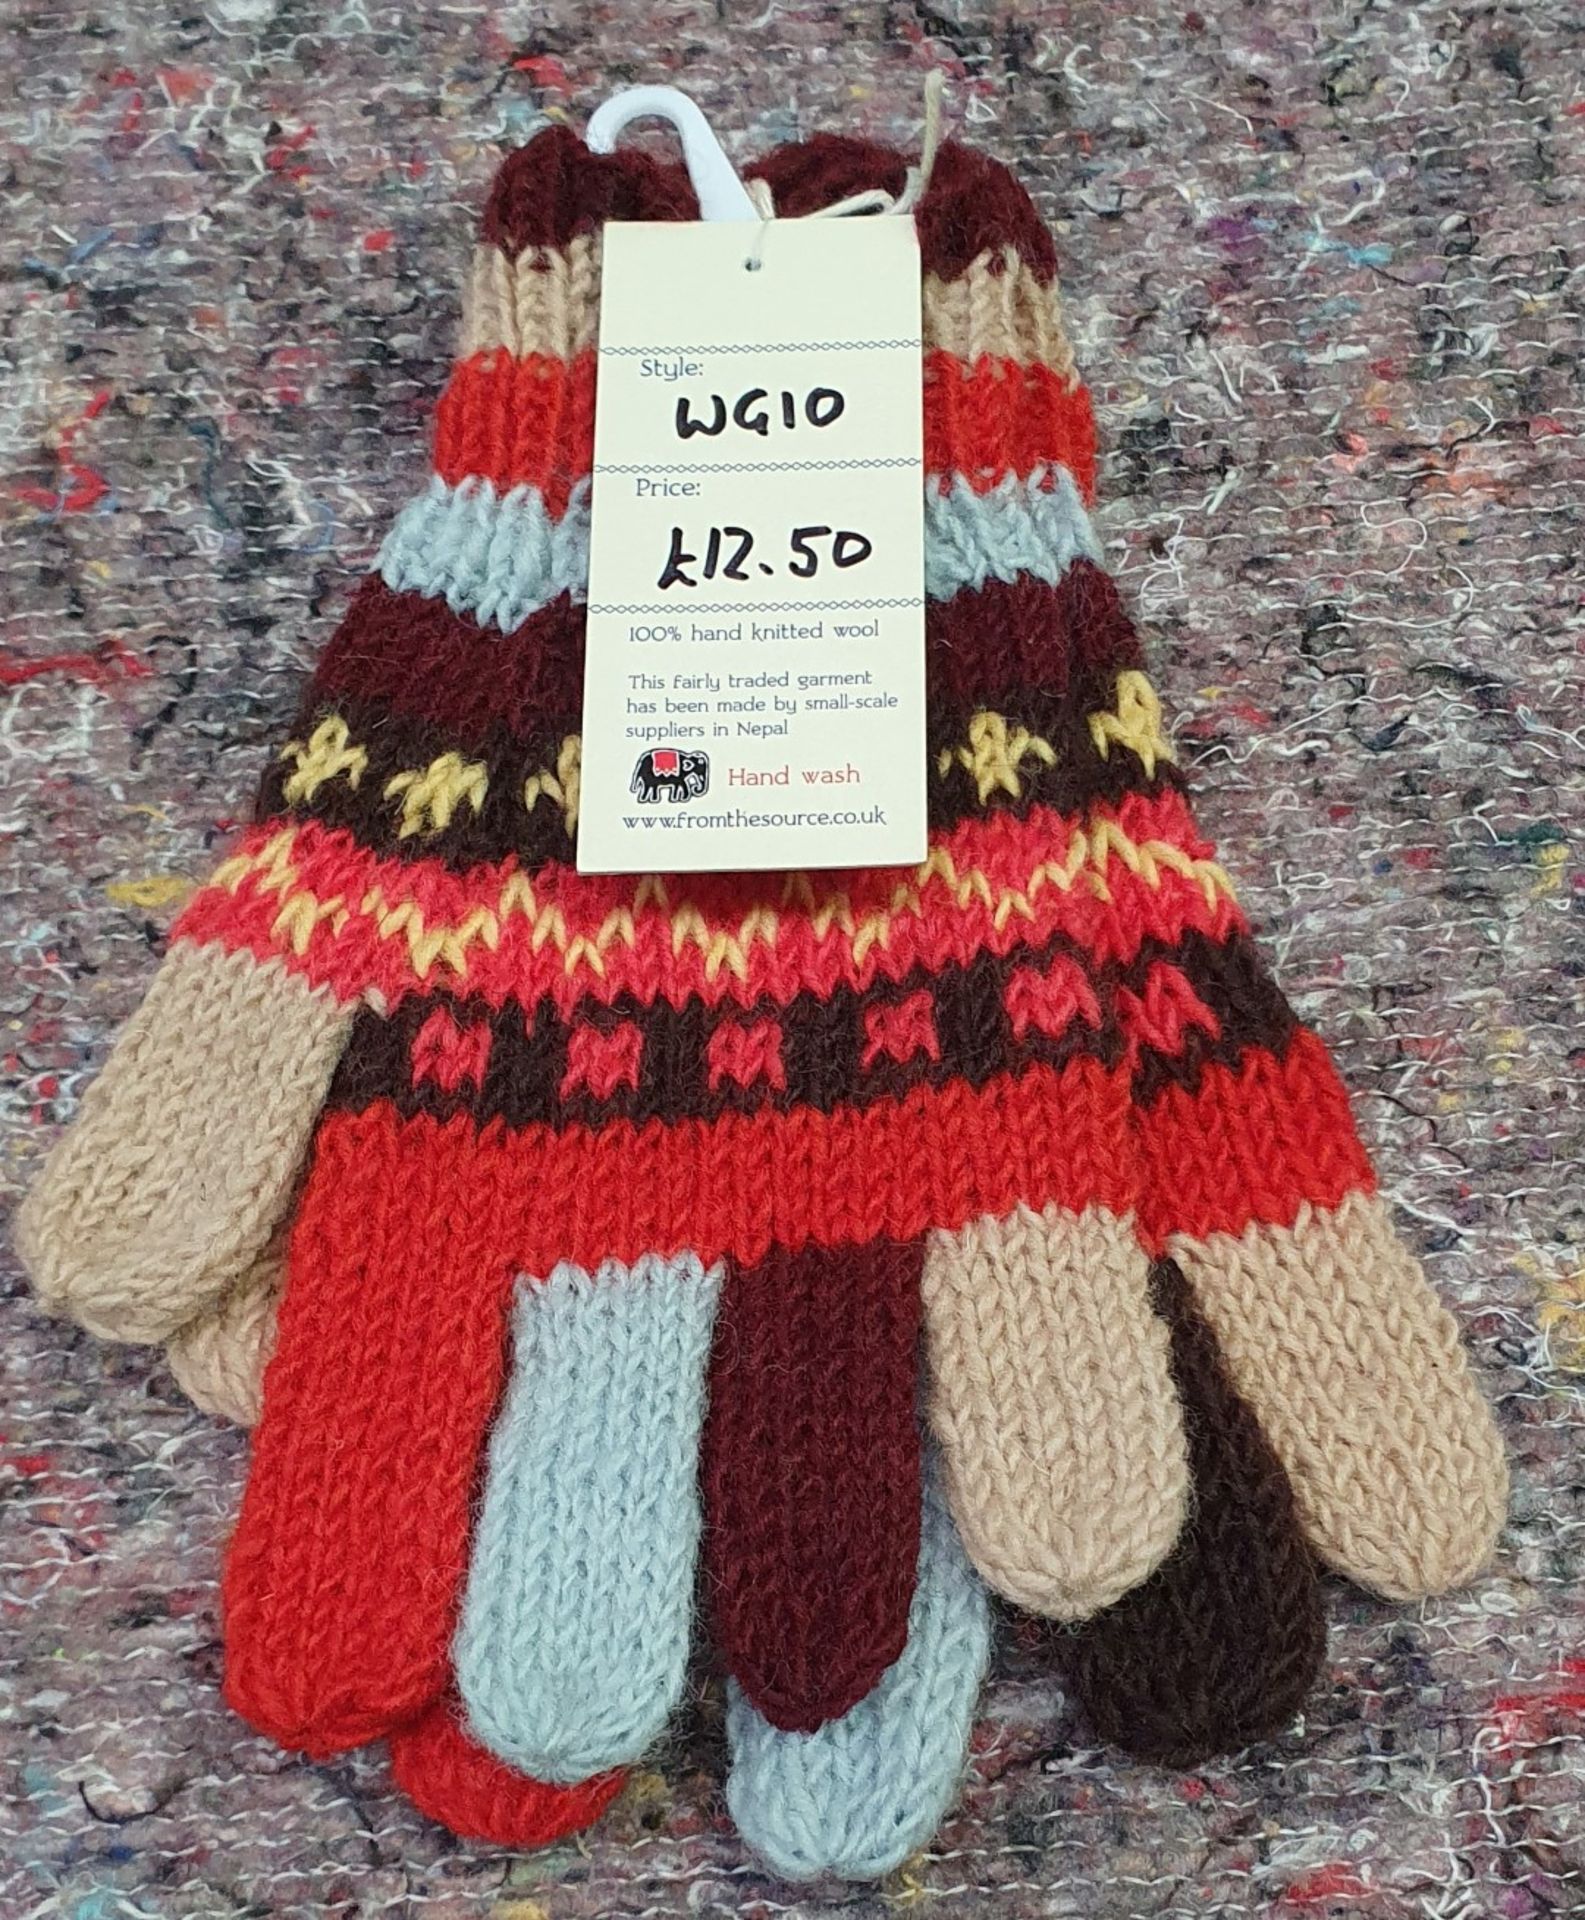 13 x Assorted Bobble Hats and Woolly Gloves by From The Source - New Stock - Ref: TCH236 - CL840 - - Image 24 of 24